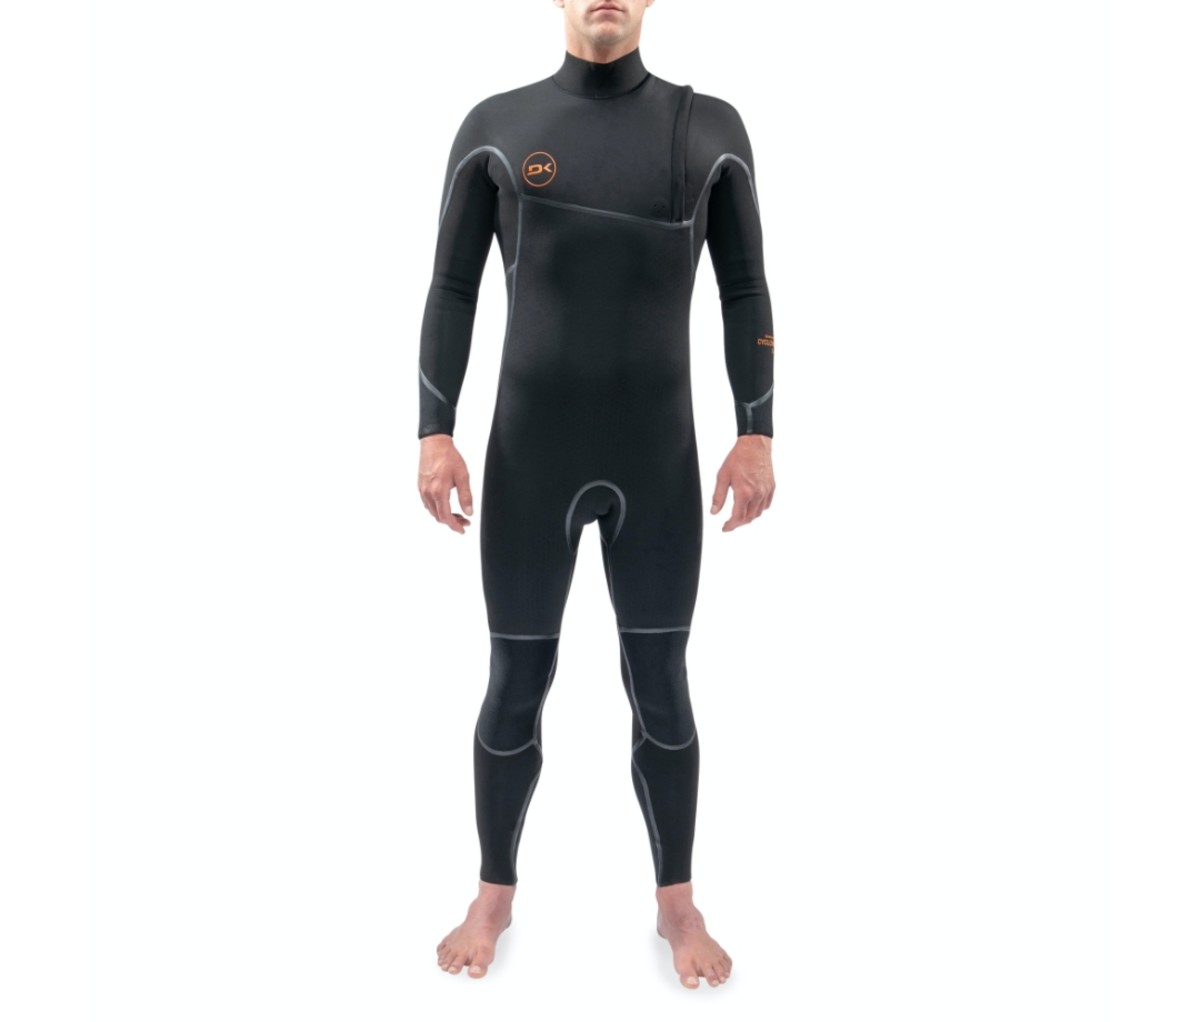 Dakine Cyclone Zip Free Full Suit 3/2mm insulated wetsuits